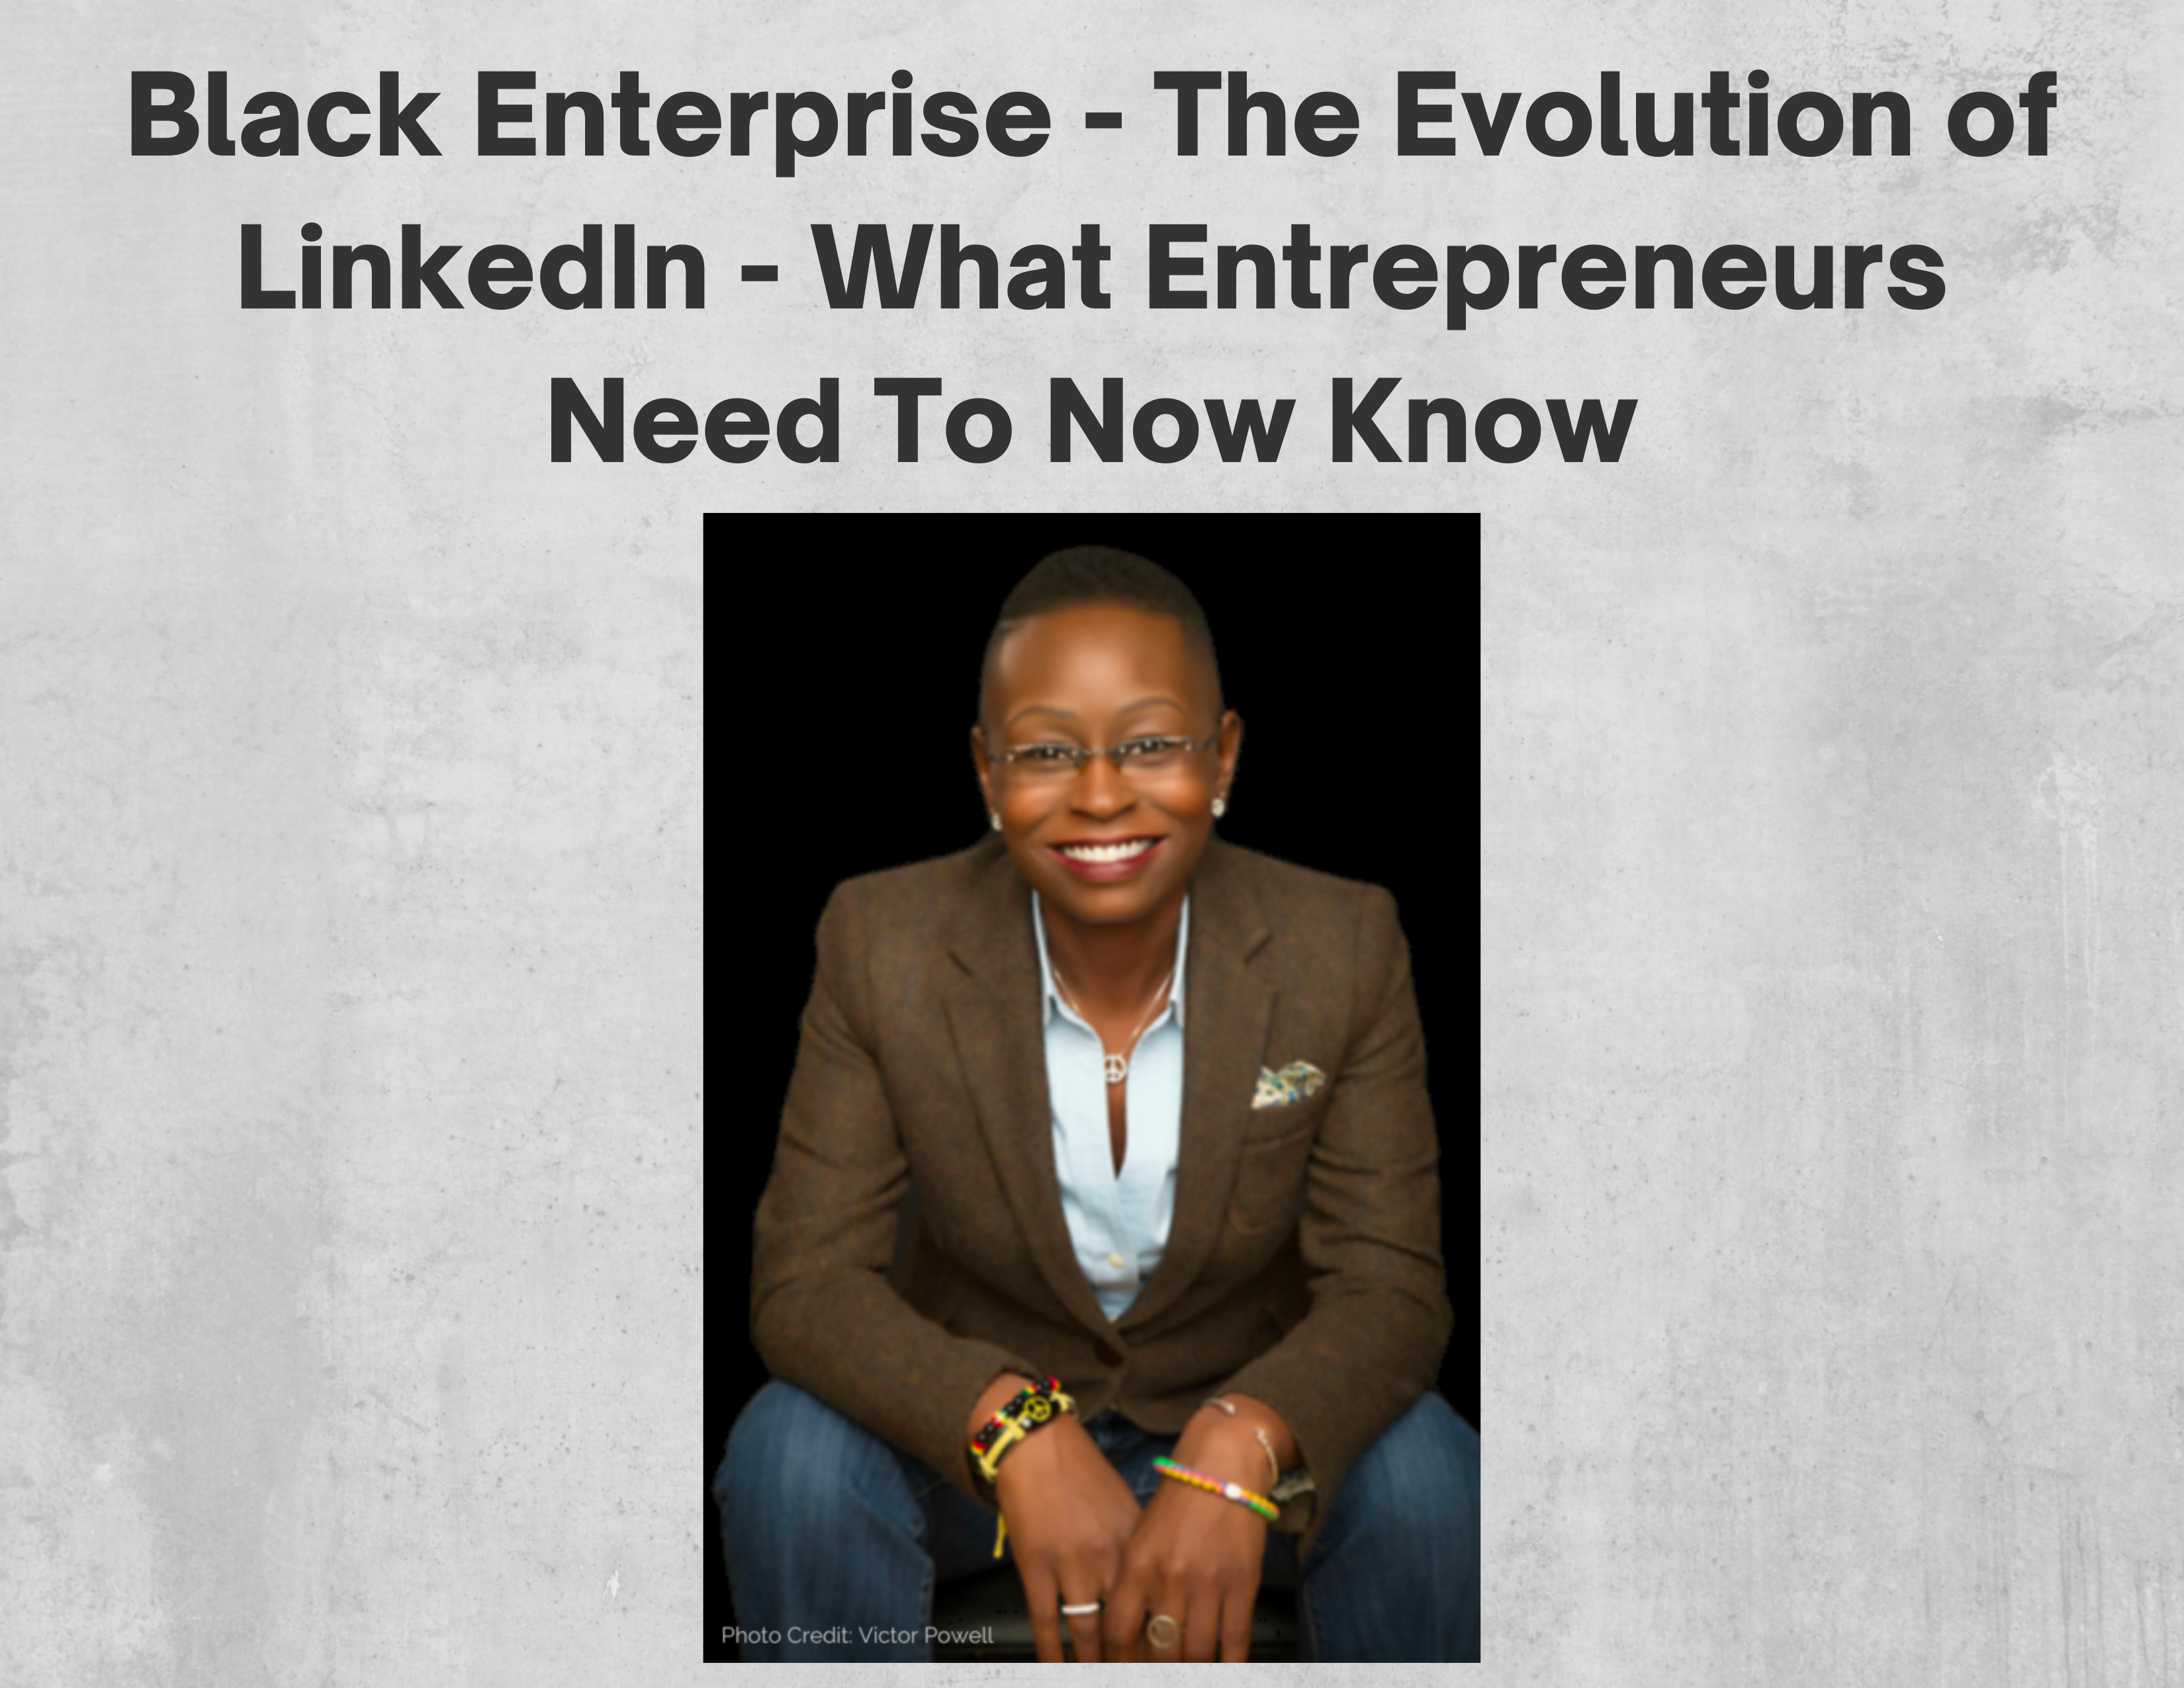 The Evolution of LinkedIn: What Entrepreneurs Need to Now Know